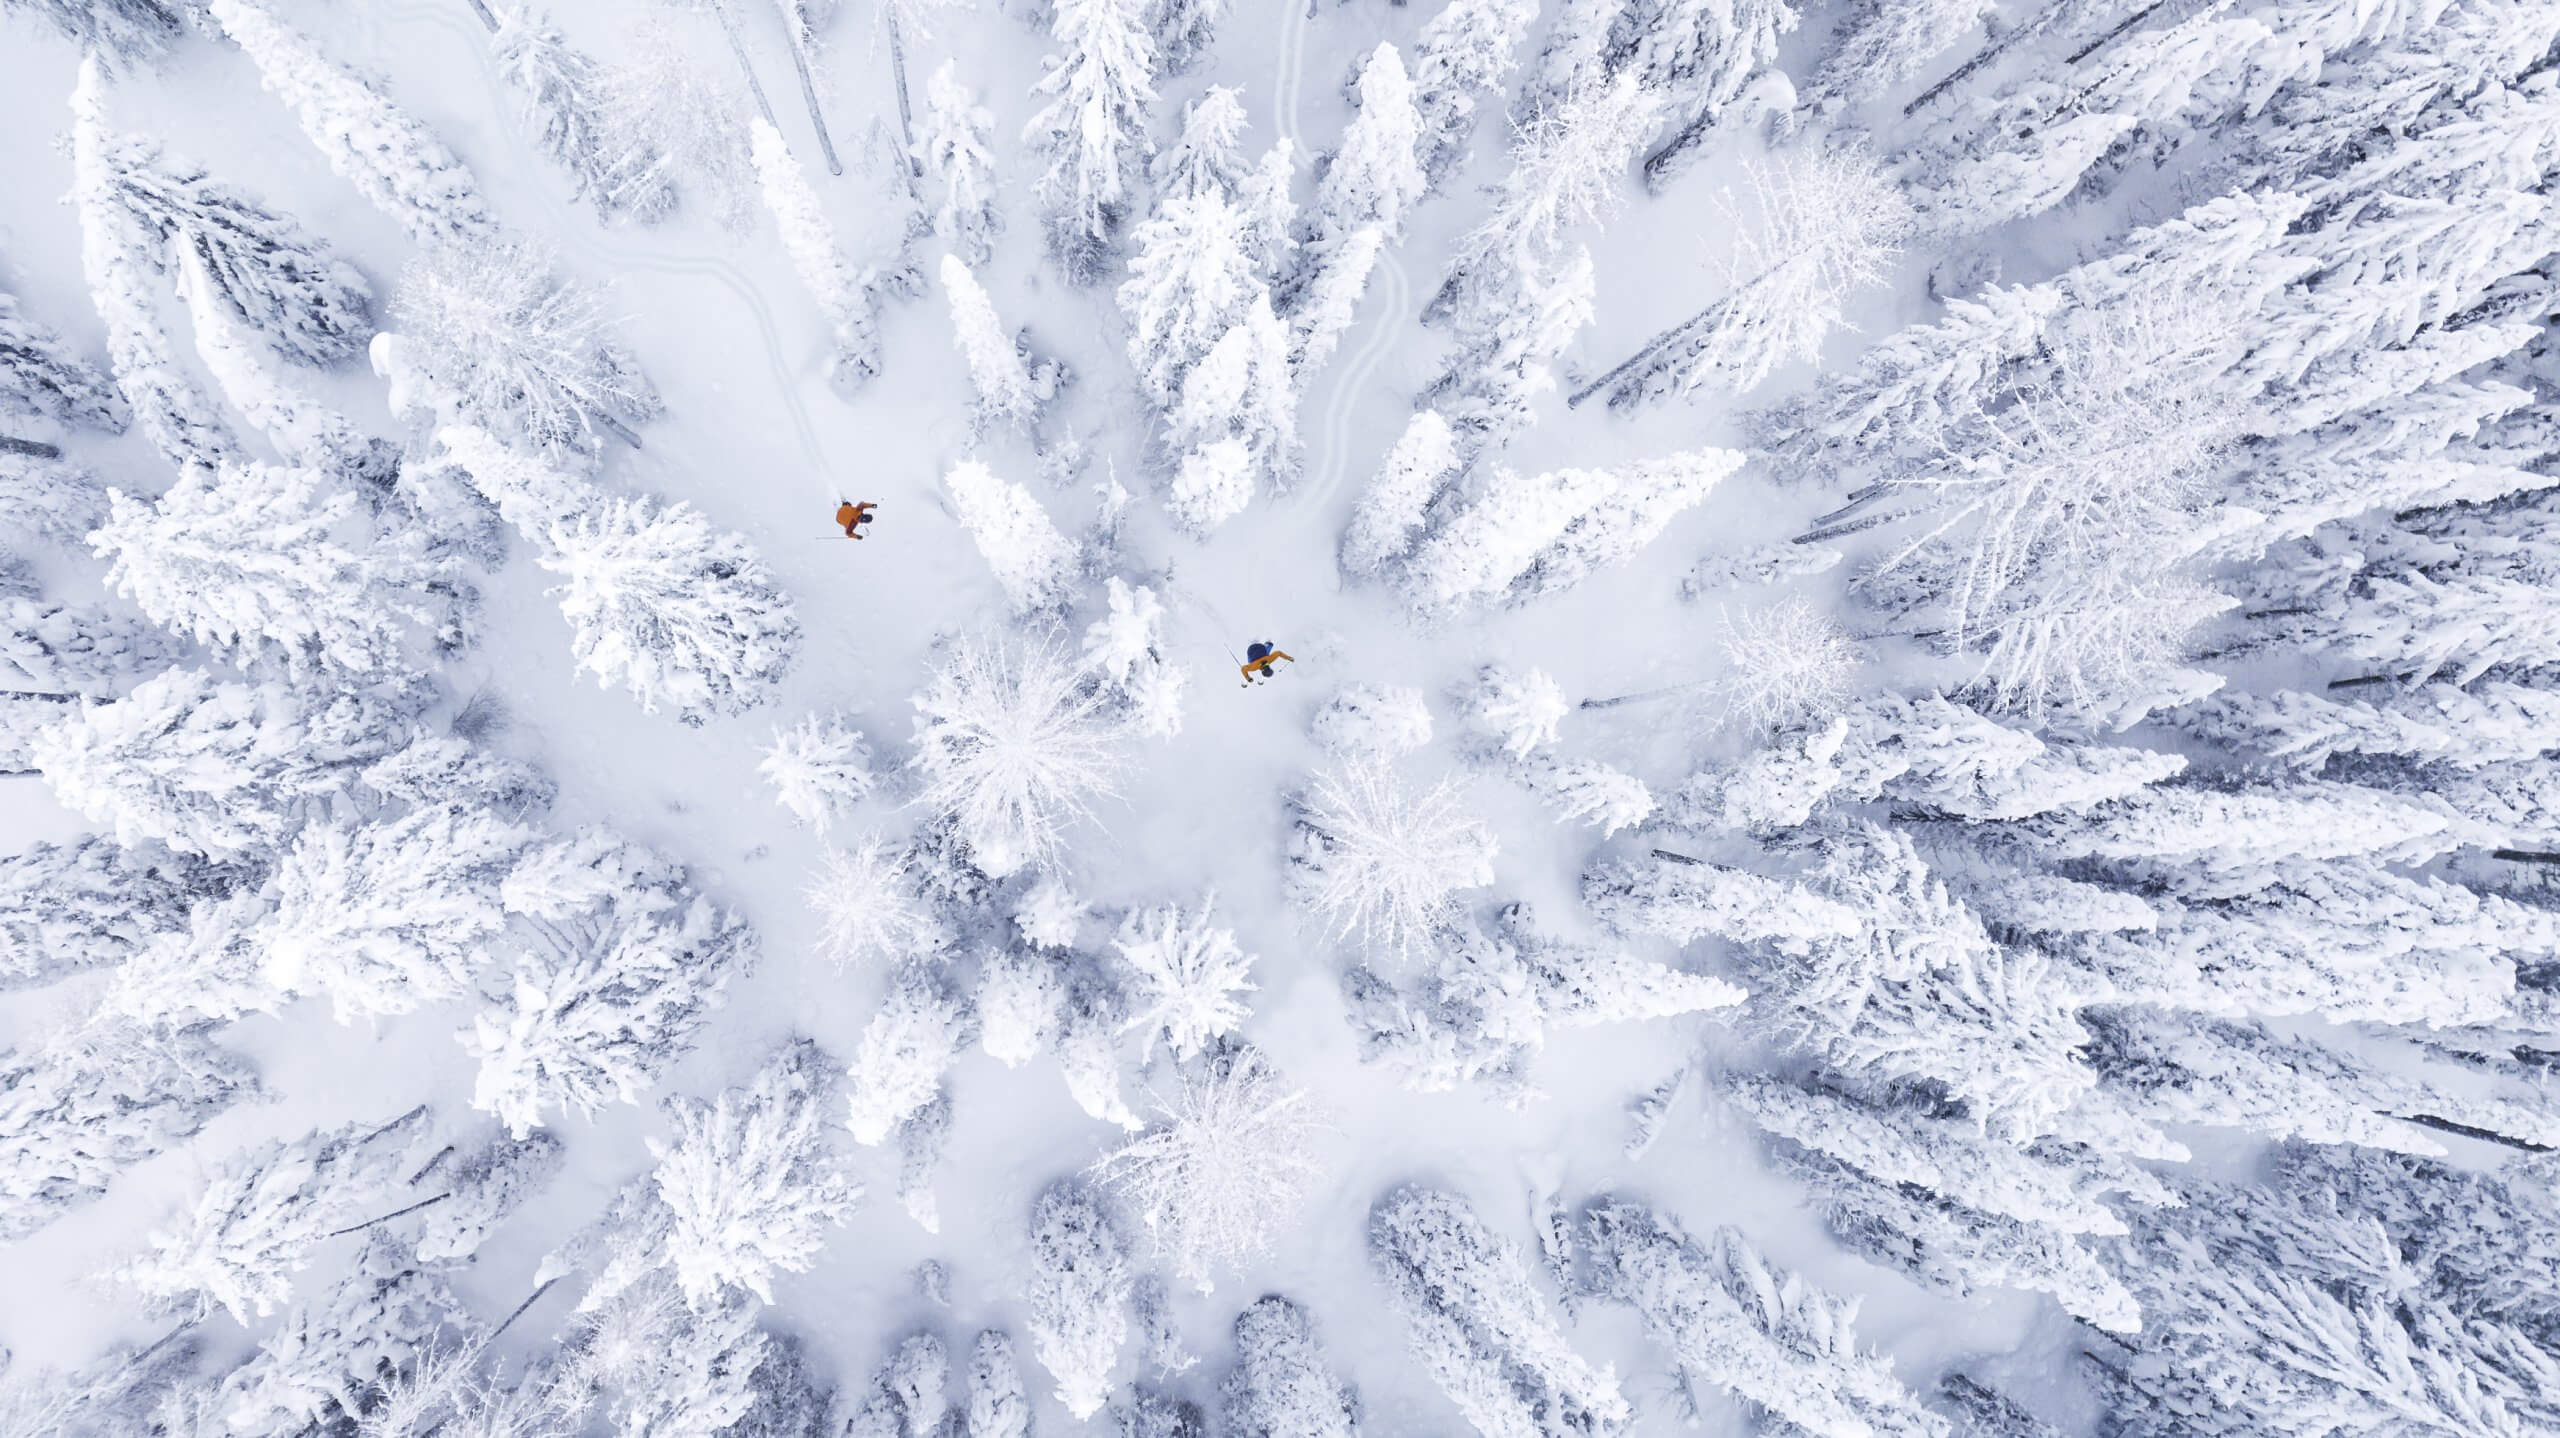 An aerial shot of two people skiing near Lookout Pass, with all the landscape covered in snow.